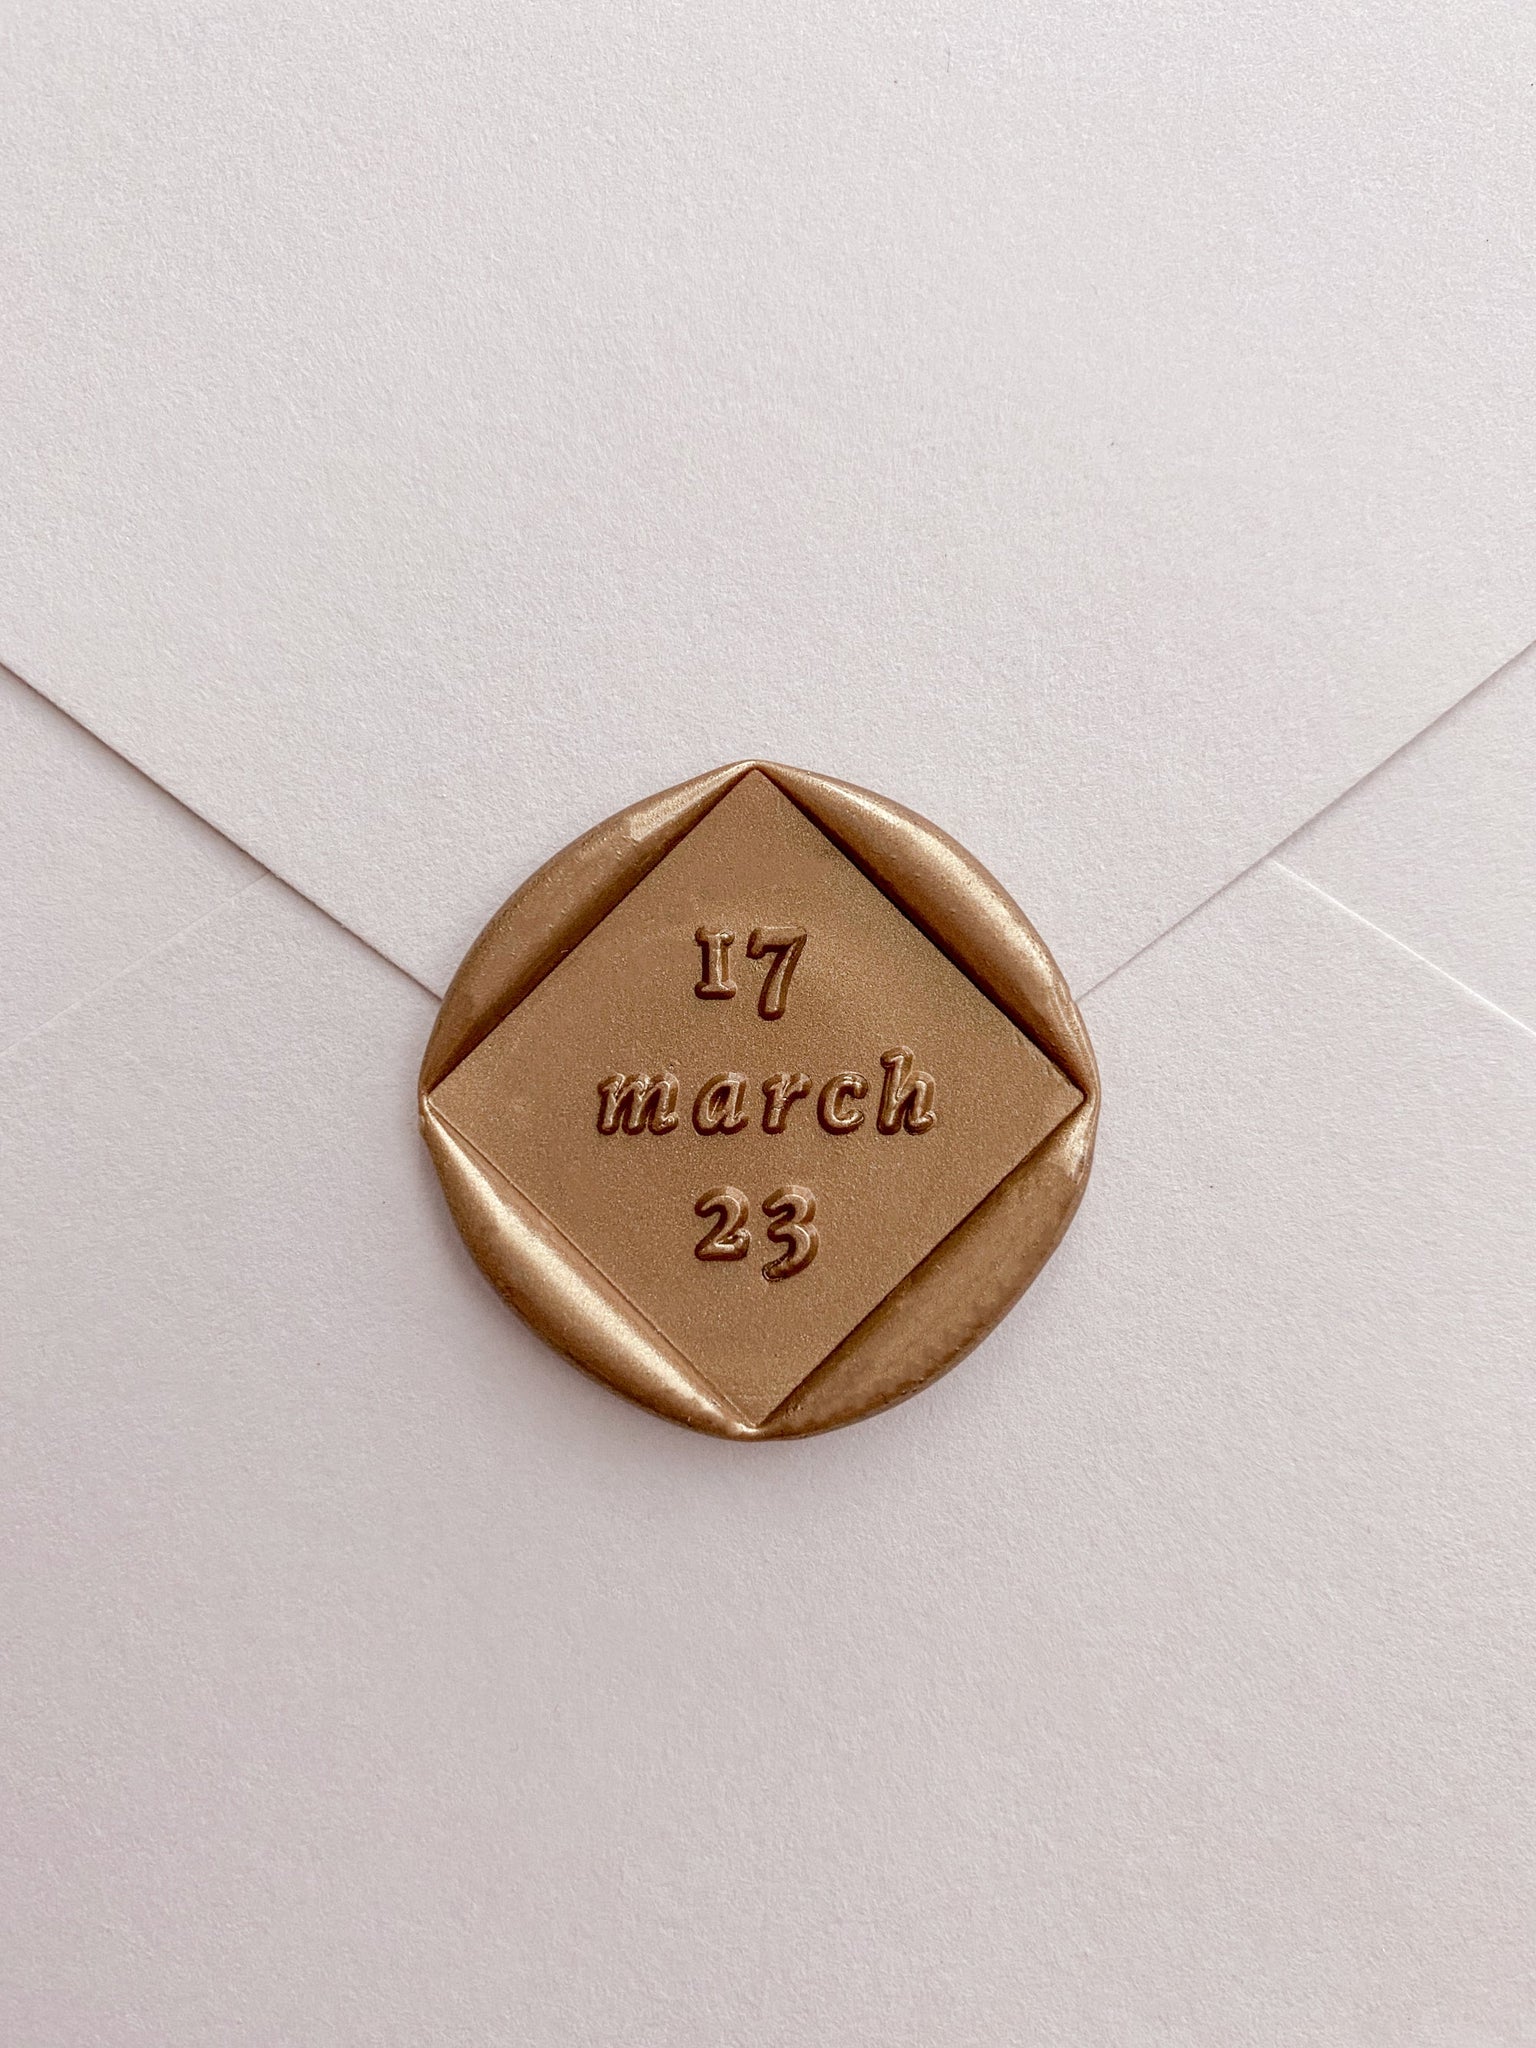 Diamond shaped personalized date wax seal in gold on paper envelope_front angle